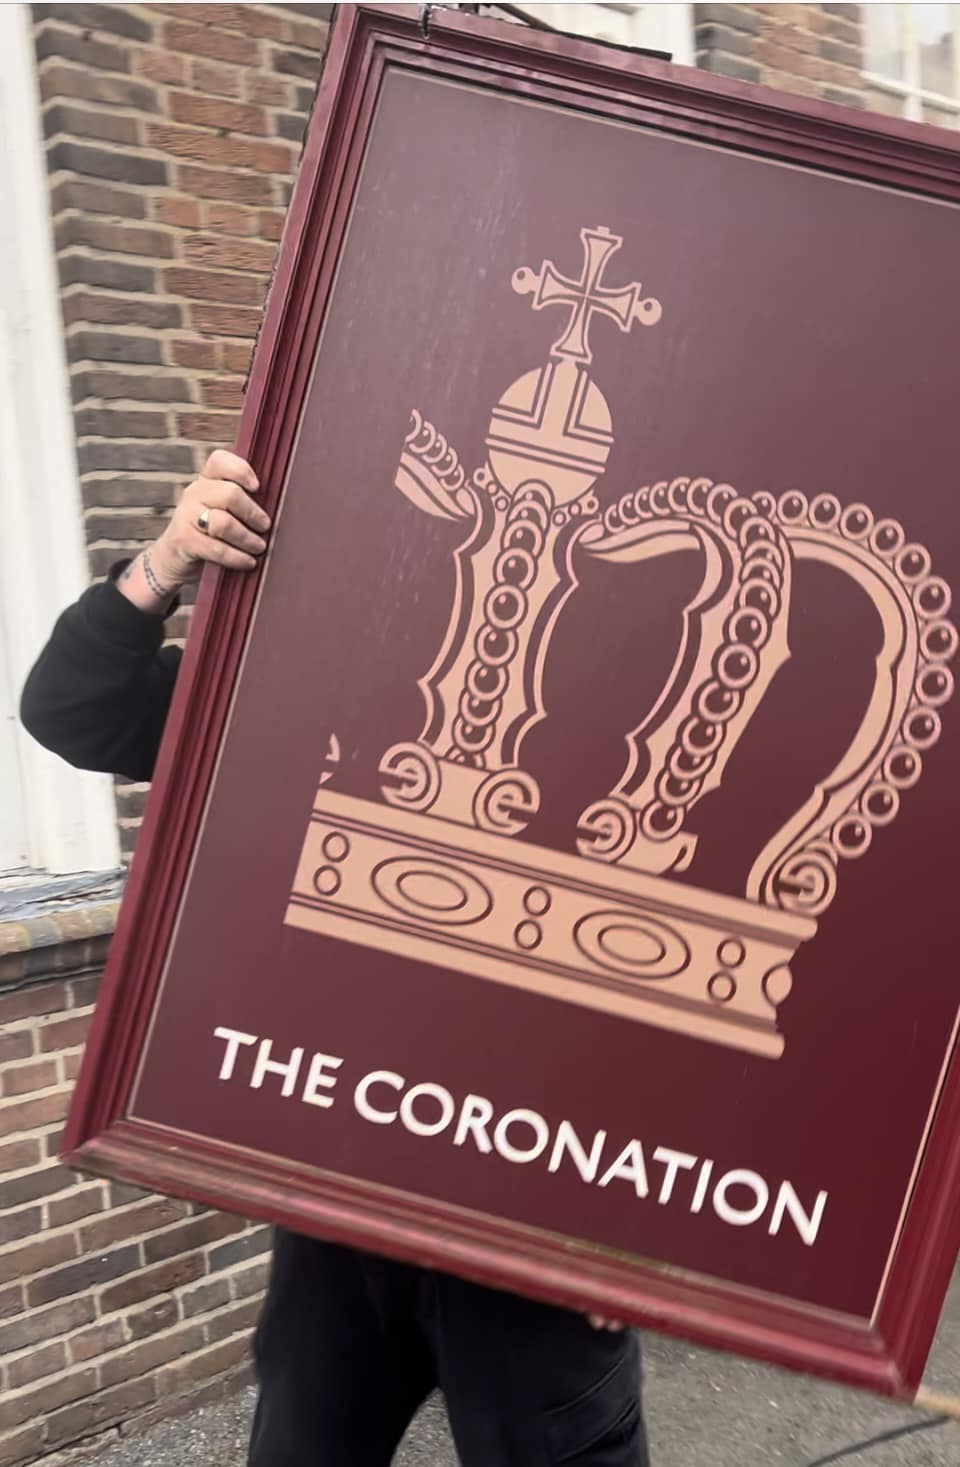 The former Coronation pub in Southport will be transformed in three phases into Connolly's Irish themed pub; Catherine's luxury rooms; and Catherine's Wine Bar